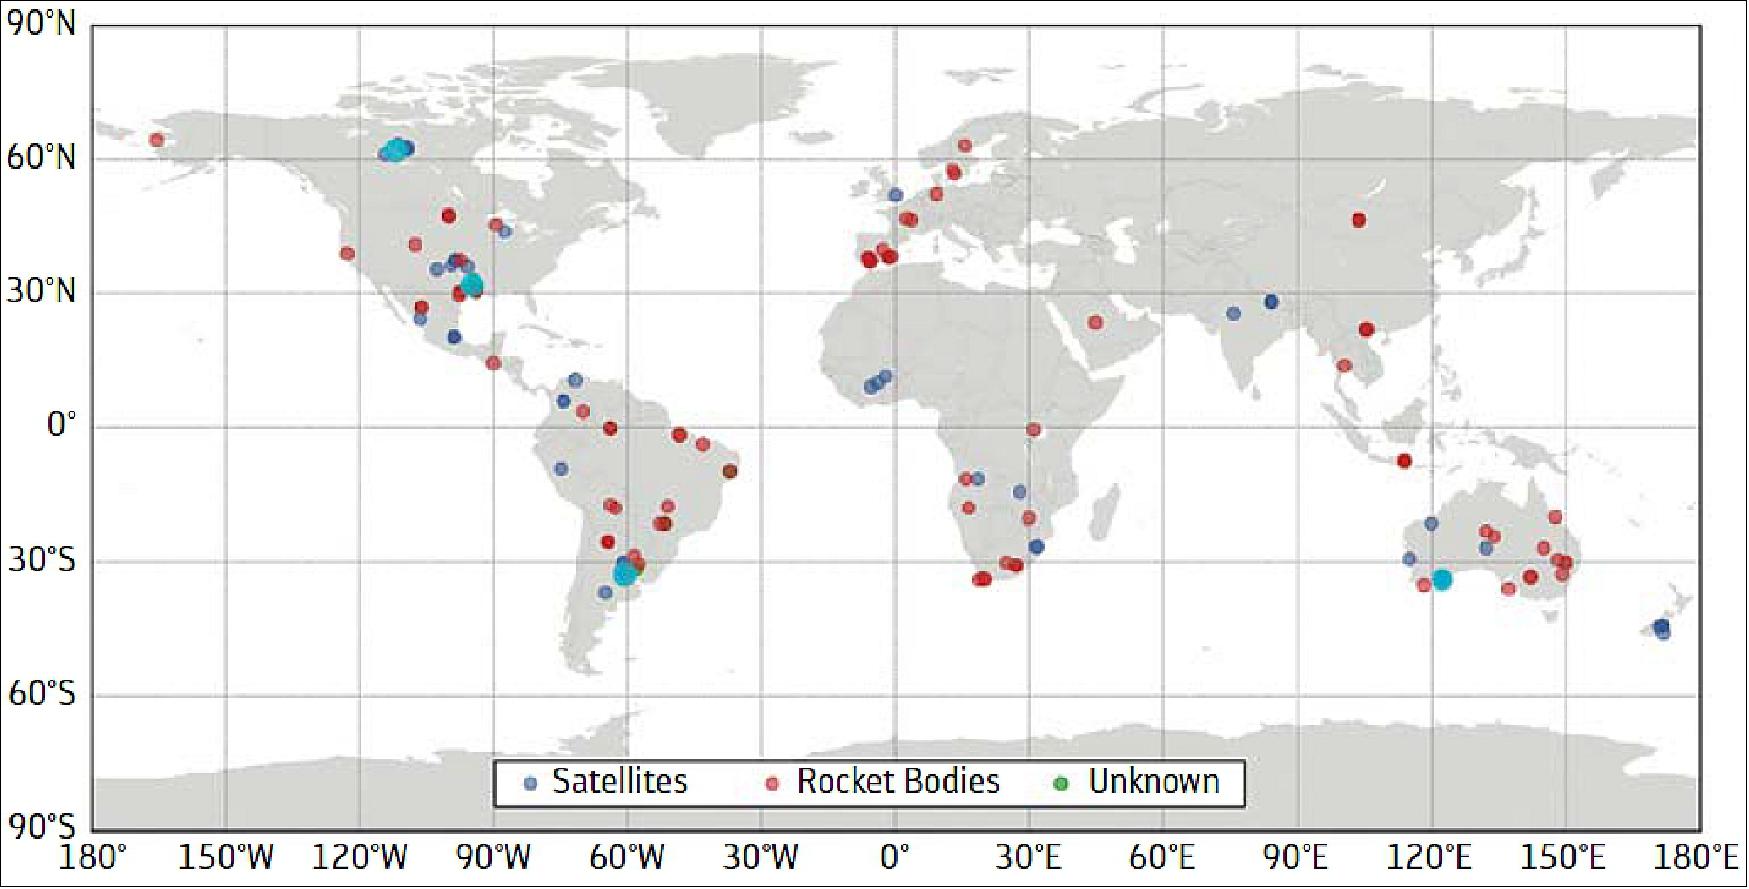 Figure 49: Locations of debris objects that have been retrieved after reentry (image credit: ESA)